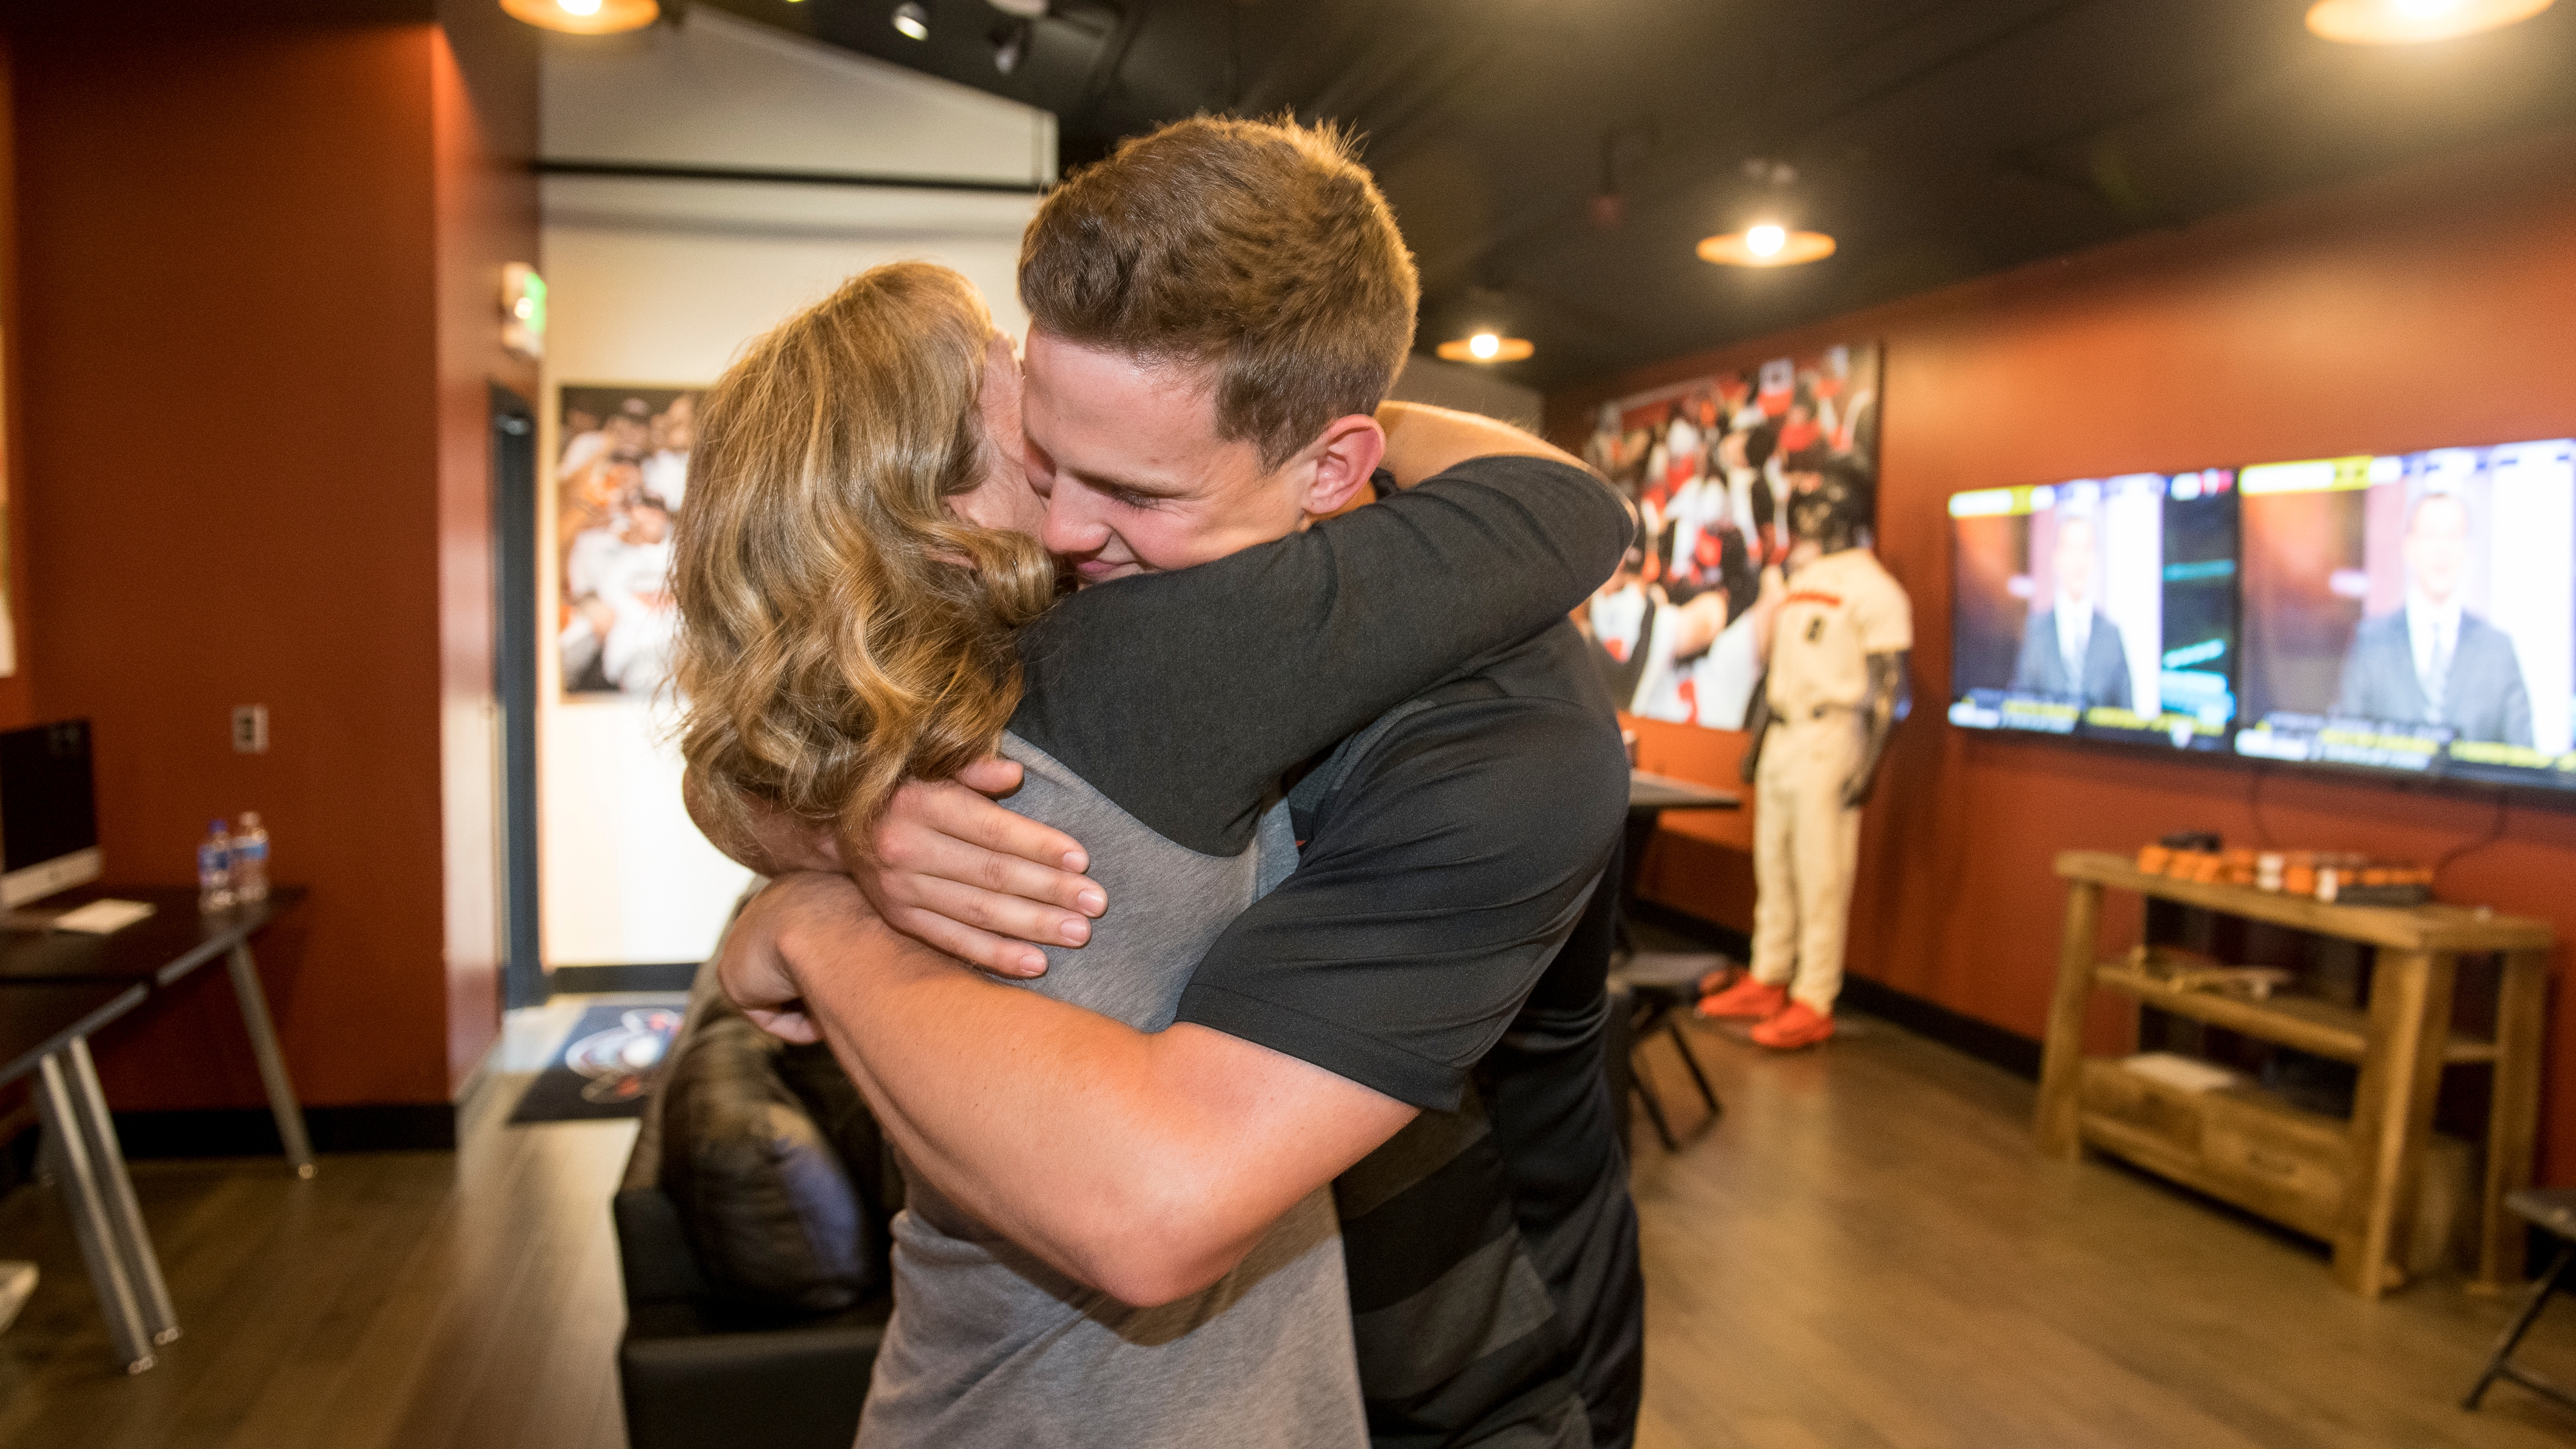 Orioles share what their moms mean to them: 'I'd give her the